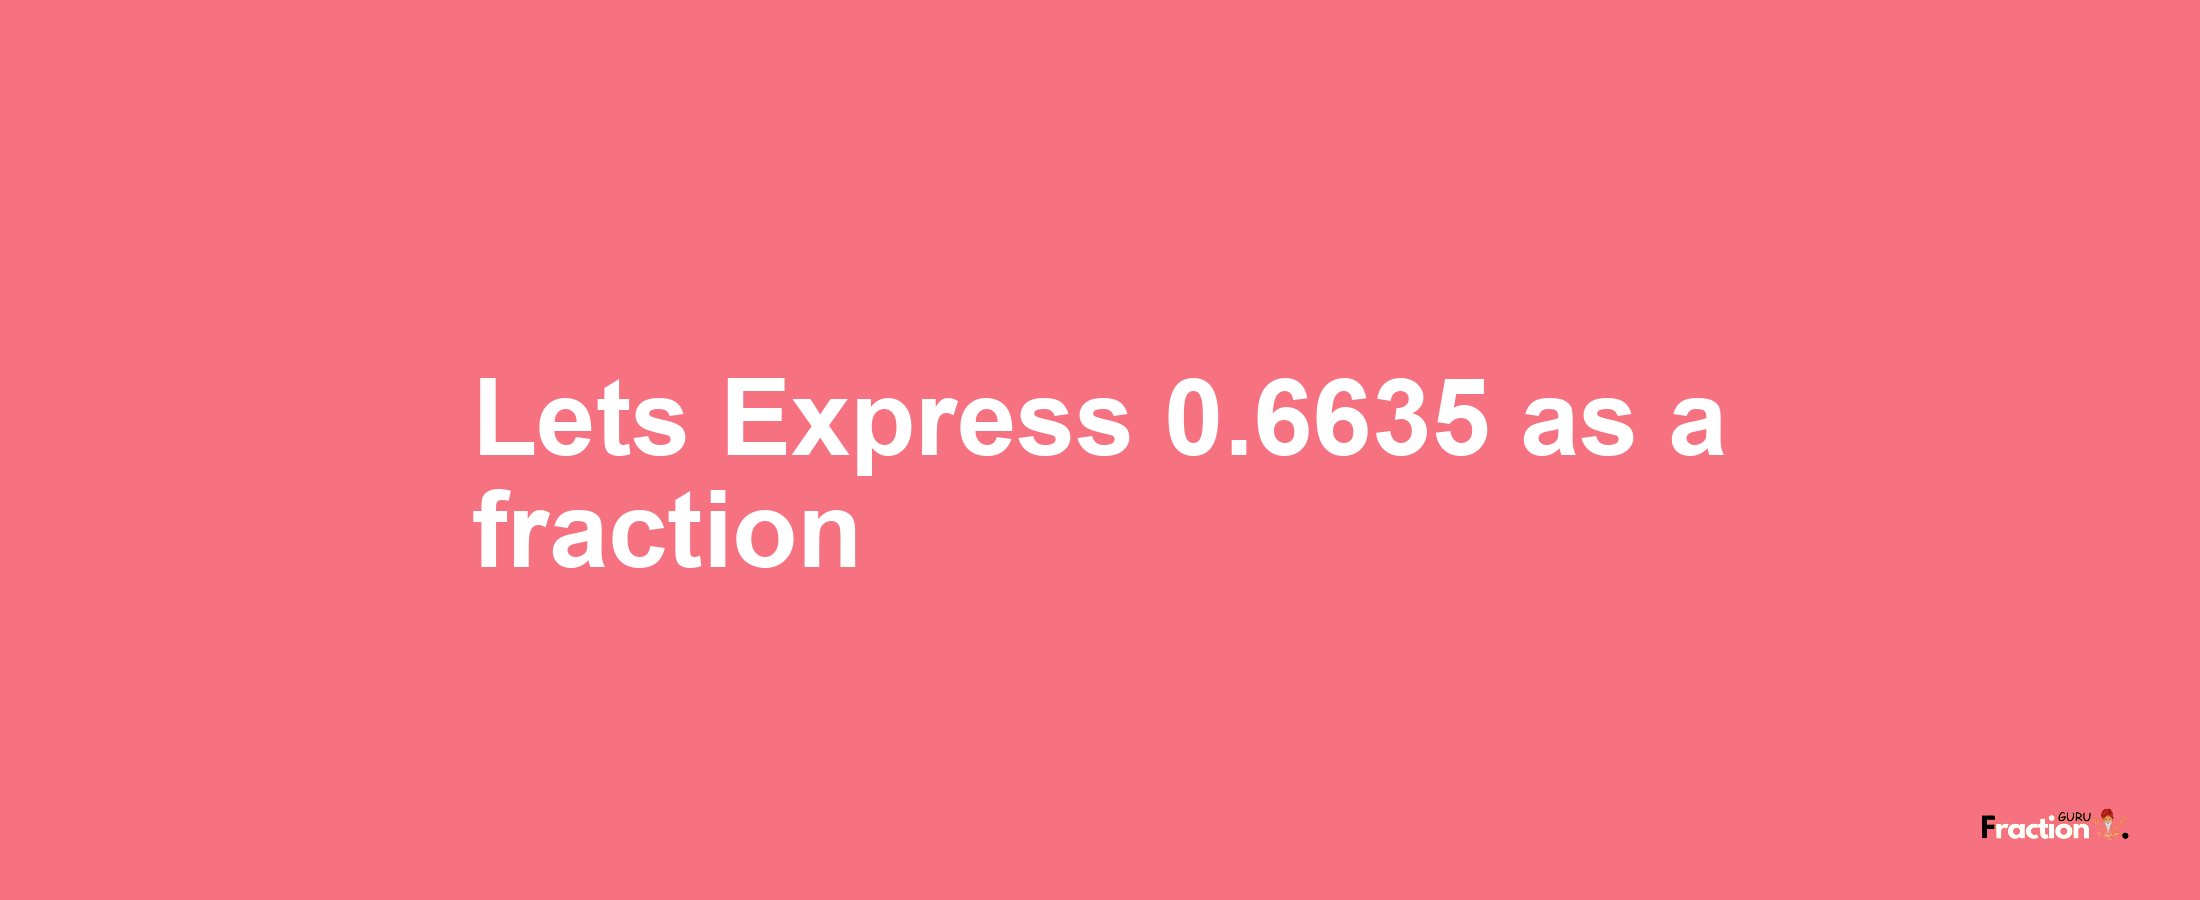 Lets Express 0.6635 as afraction